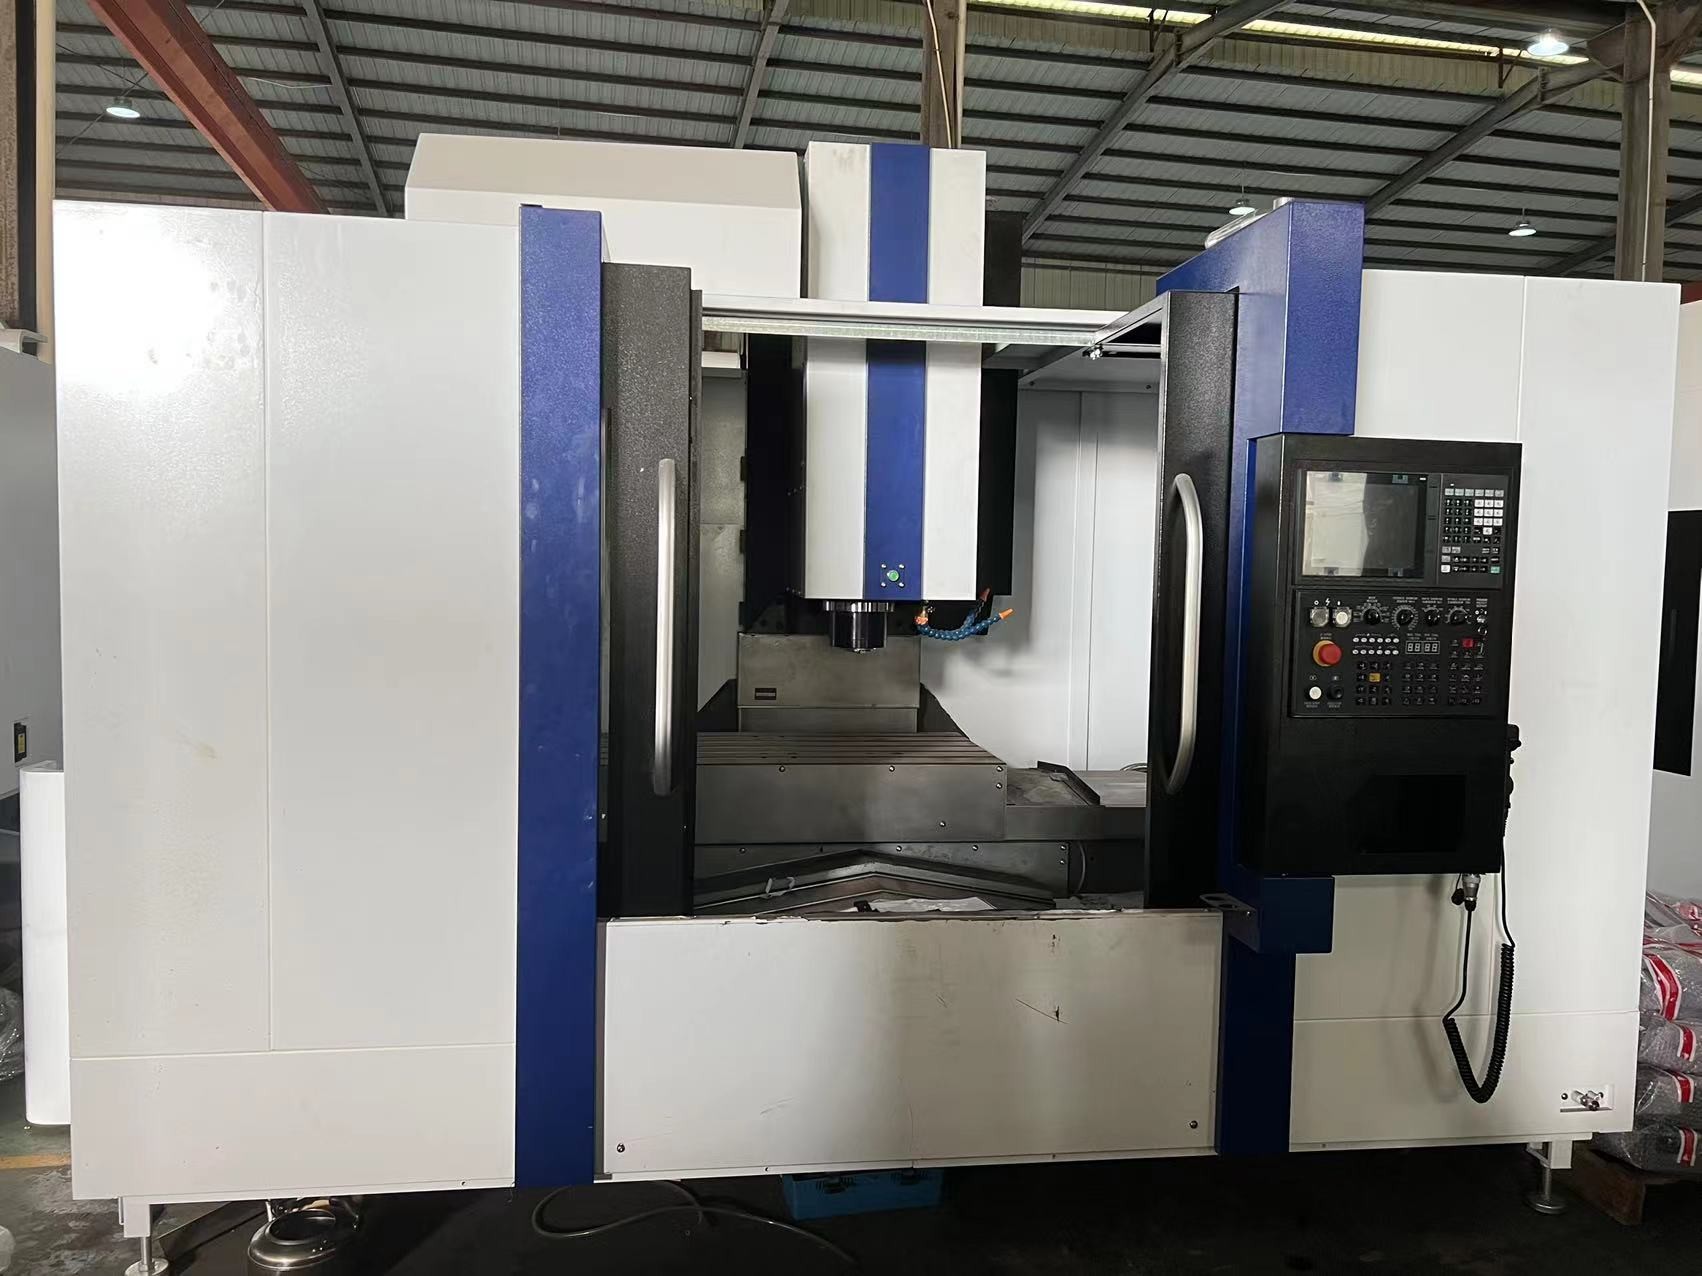  OEM CNC Turn Mill Center Machine 850 3 Axis VMC FANUC Mitsubishi System Manufactures